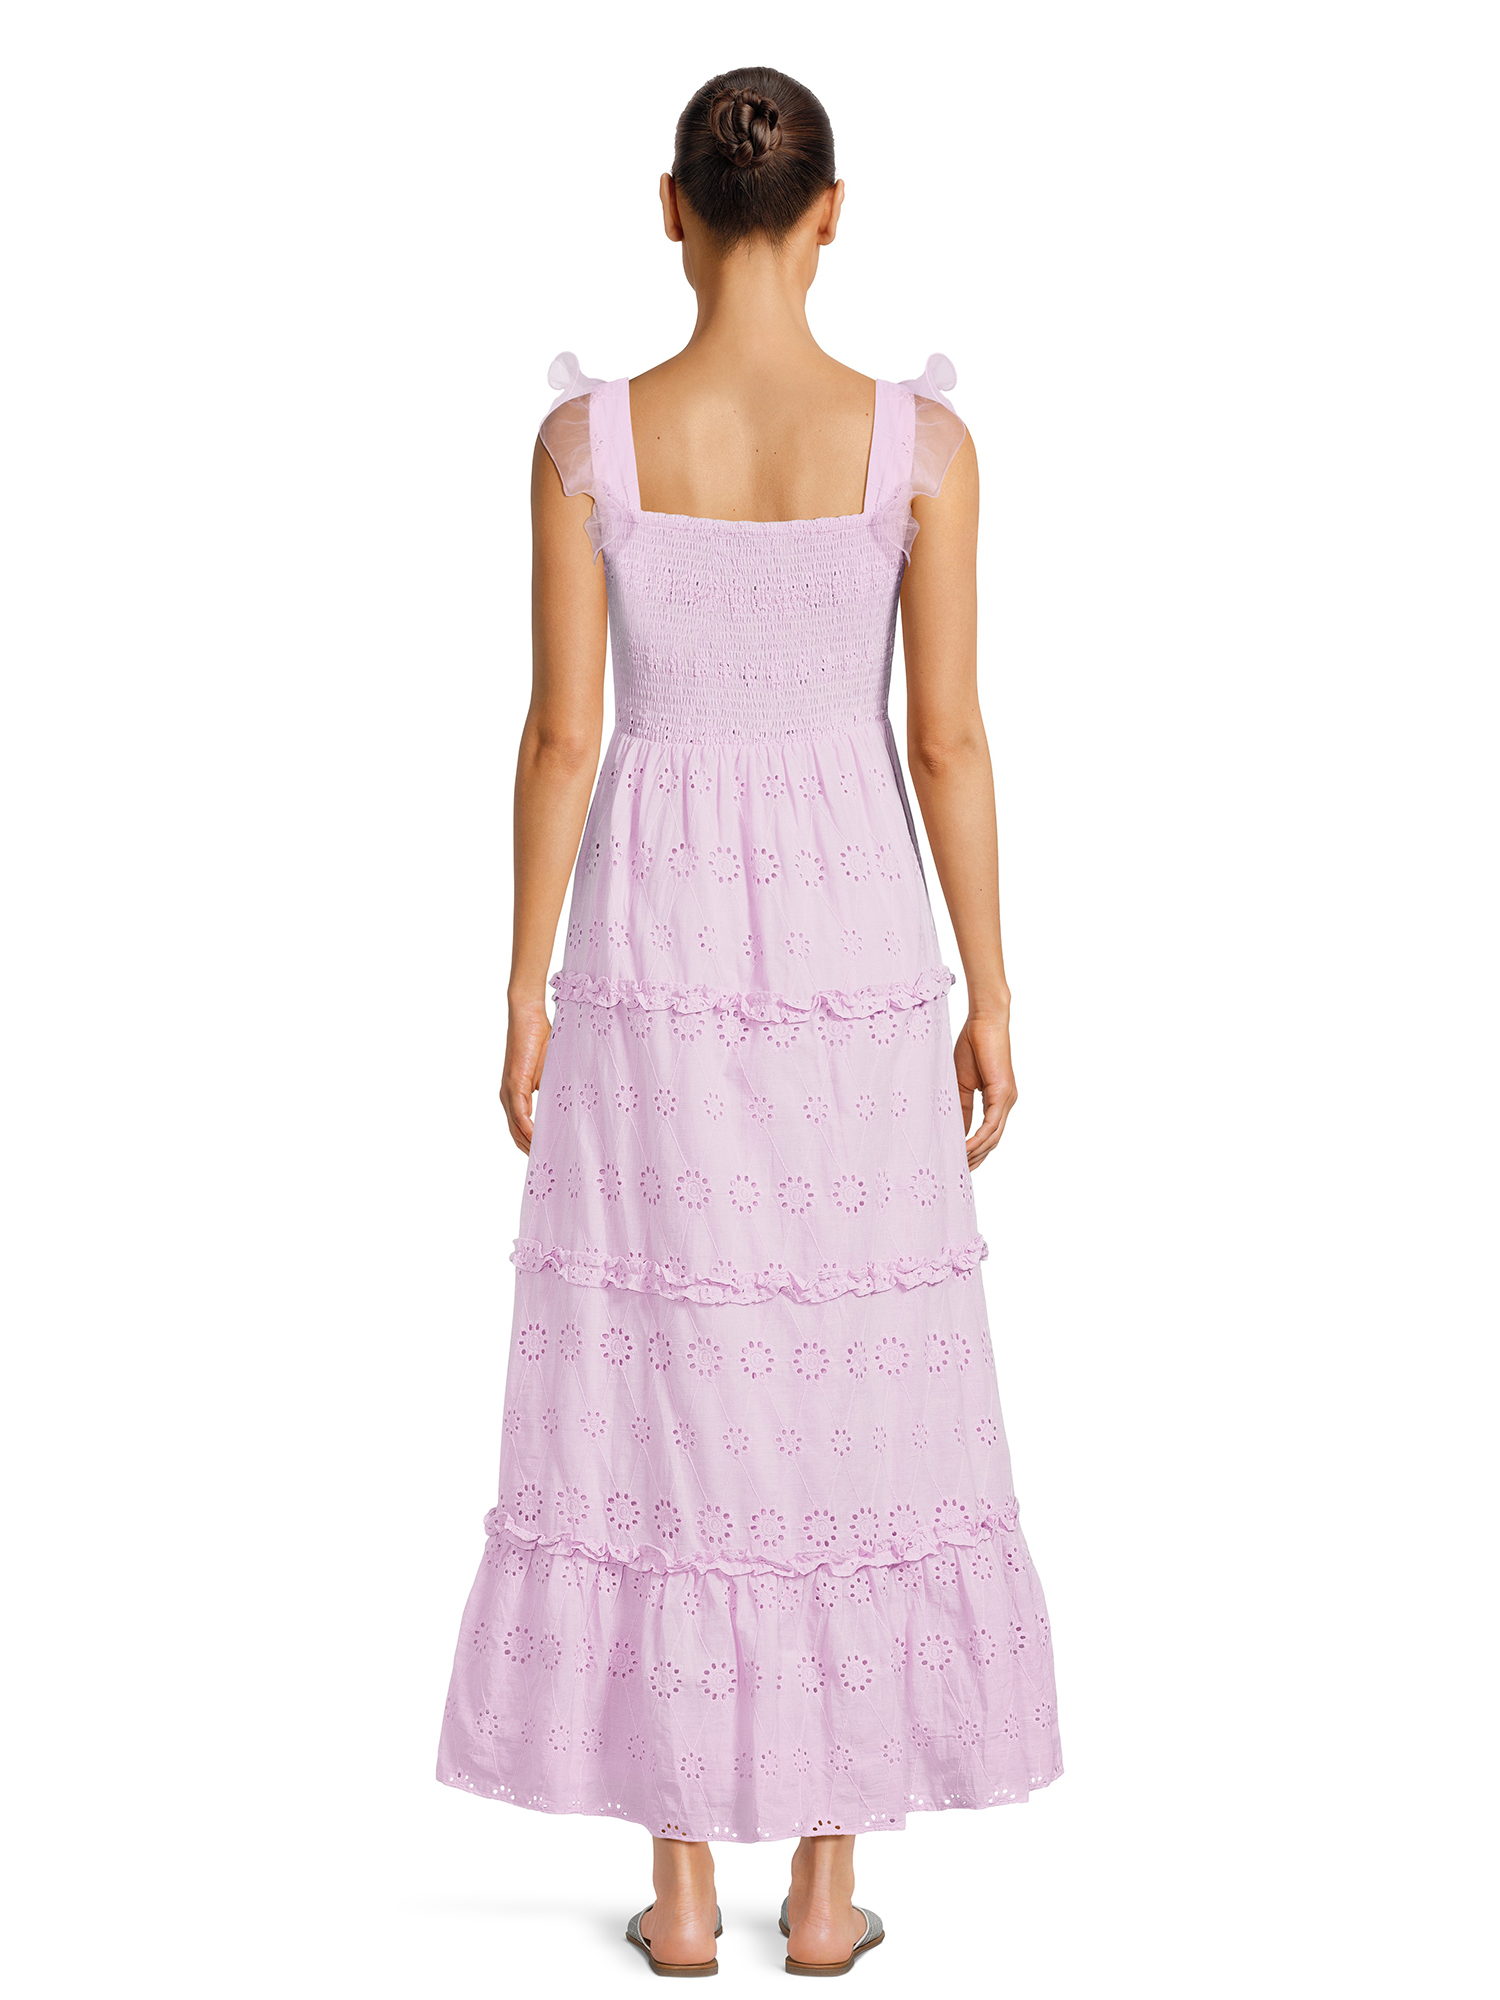 Label Rail x CheapChicFinds Women's Tiered Broderie Maxi Dress - image 5 of 7